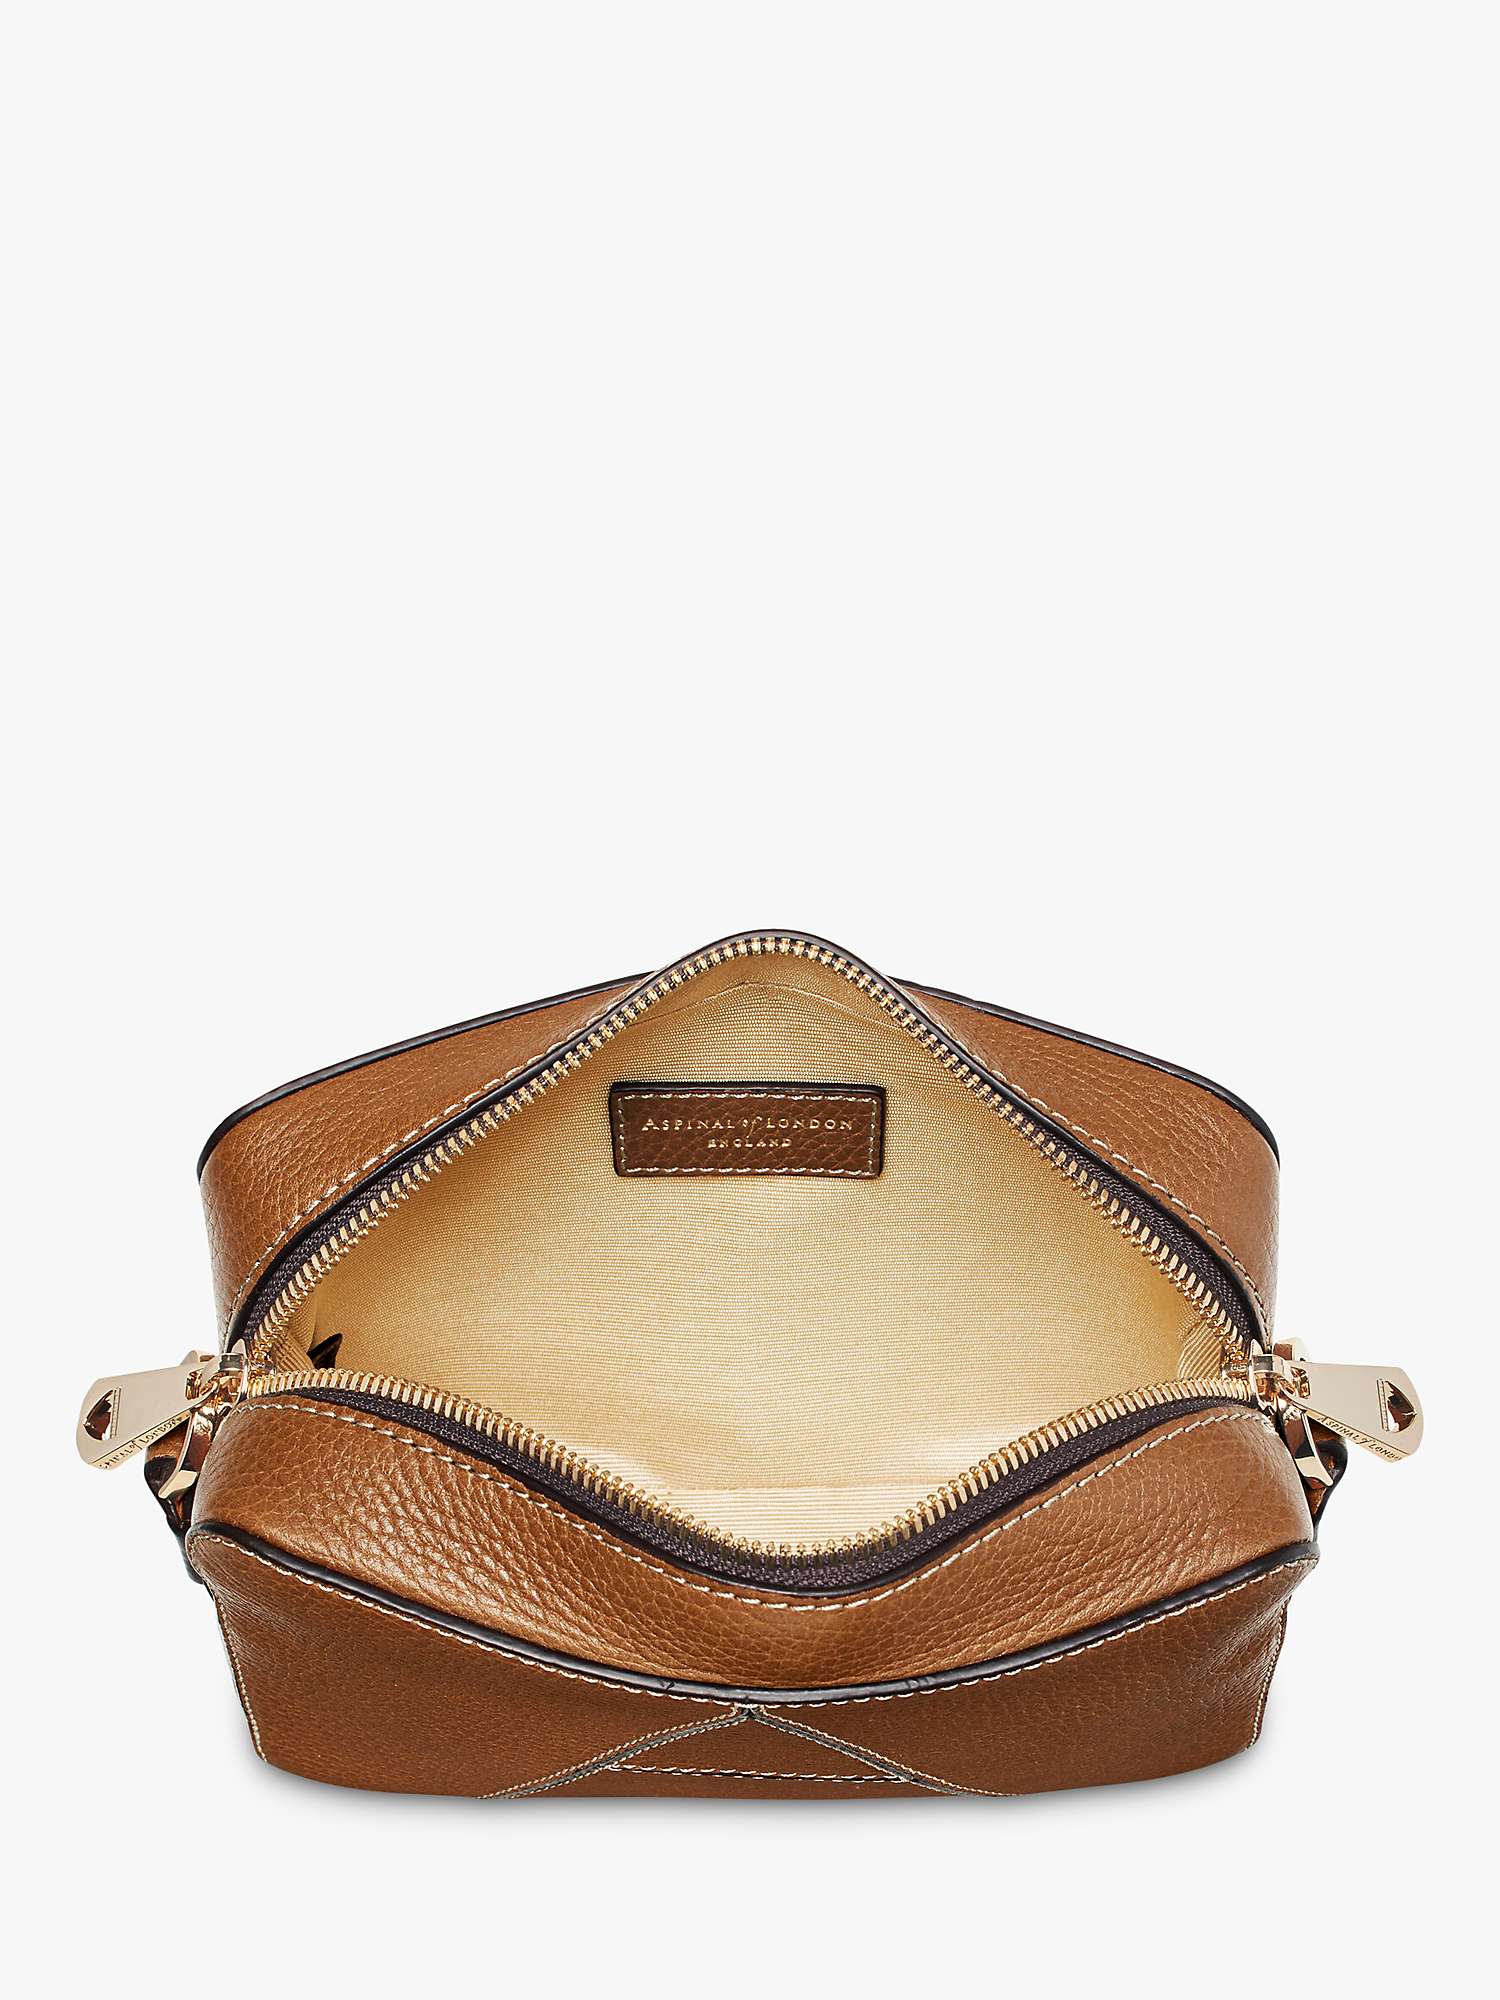 Buy Aspinal of London Pebble Leather Camera A Bag Online at johnlewis.com